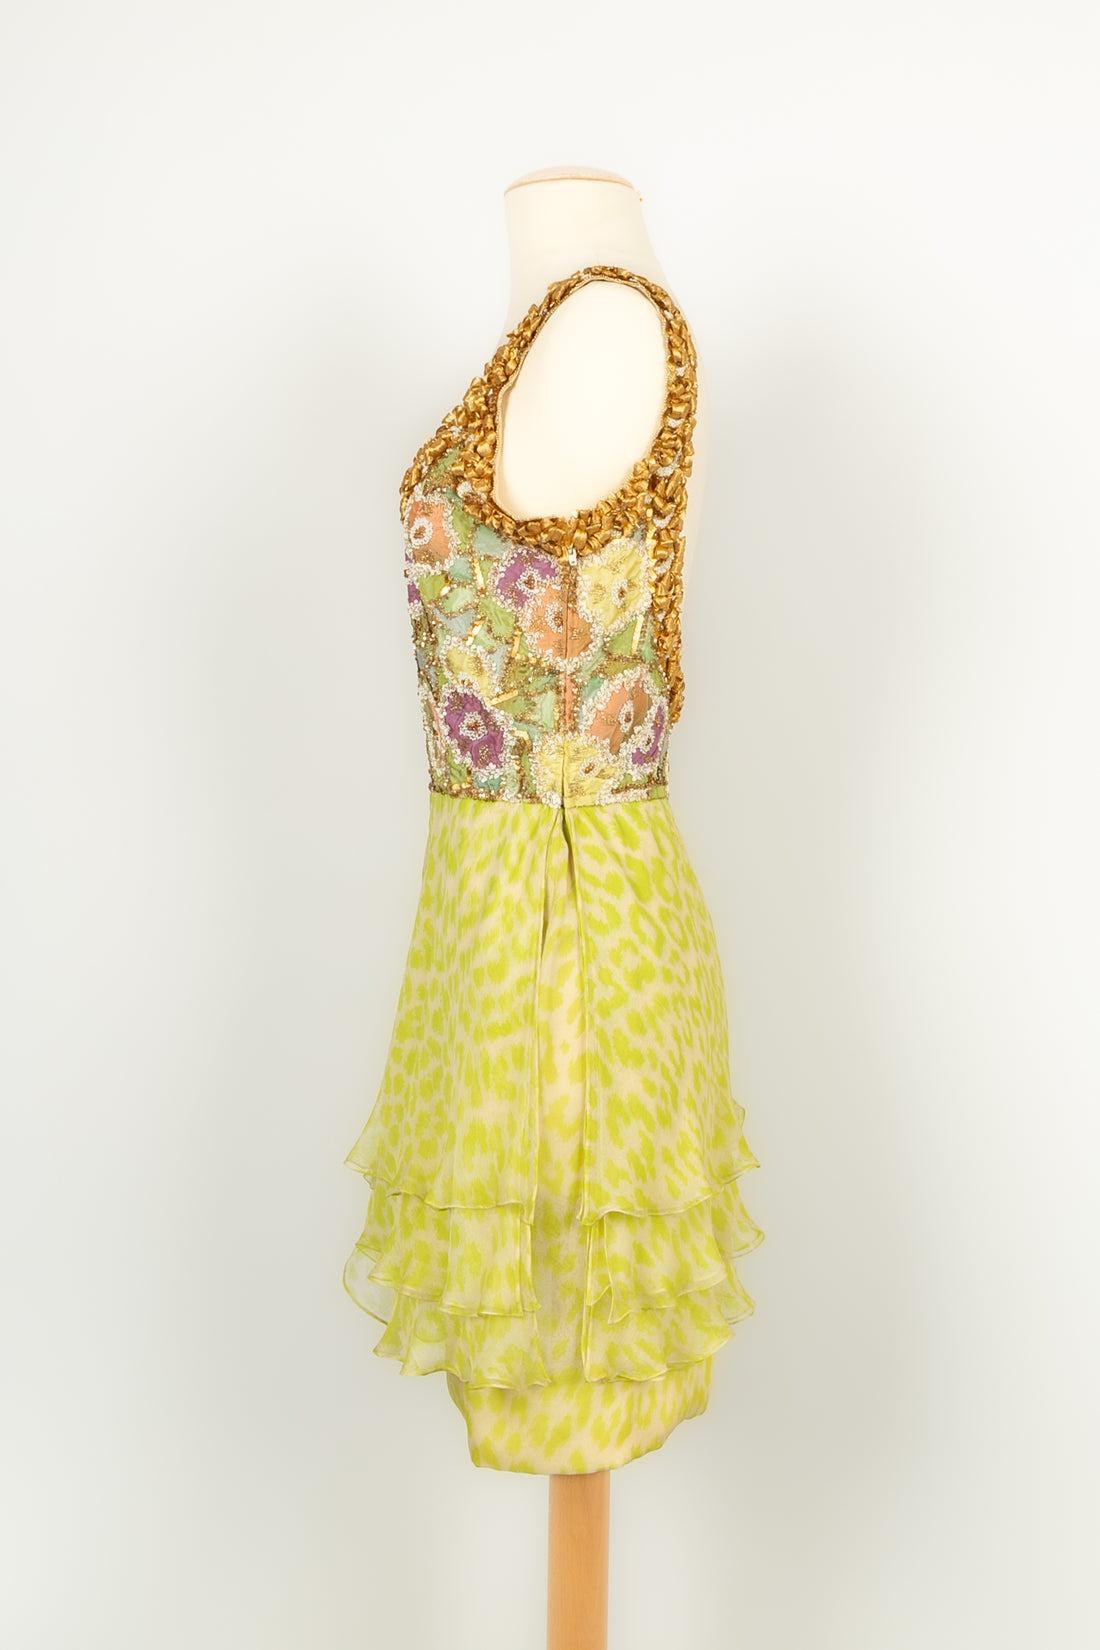 Valentino Set Couture Dress in Green-Tone Silk, 1990s For Sale 1